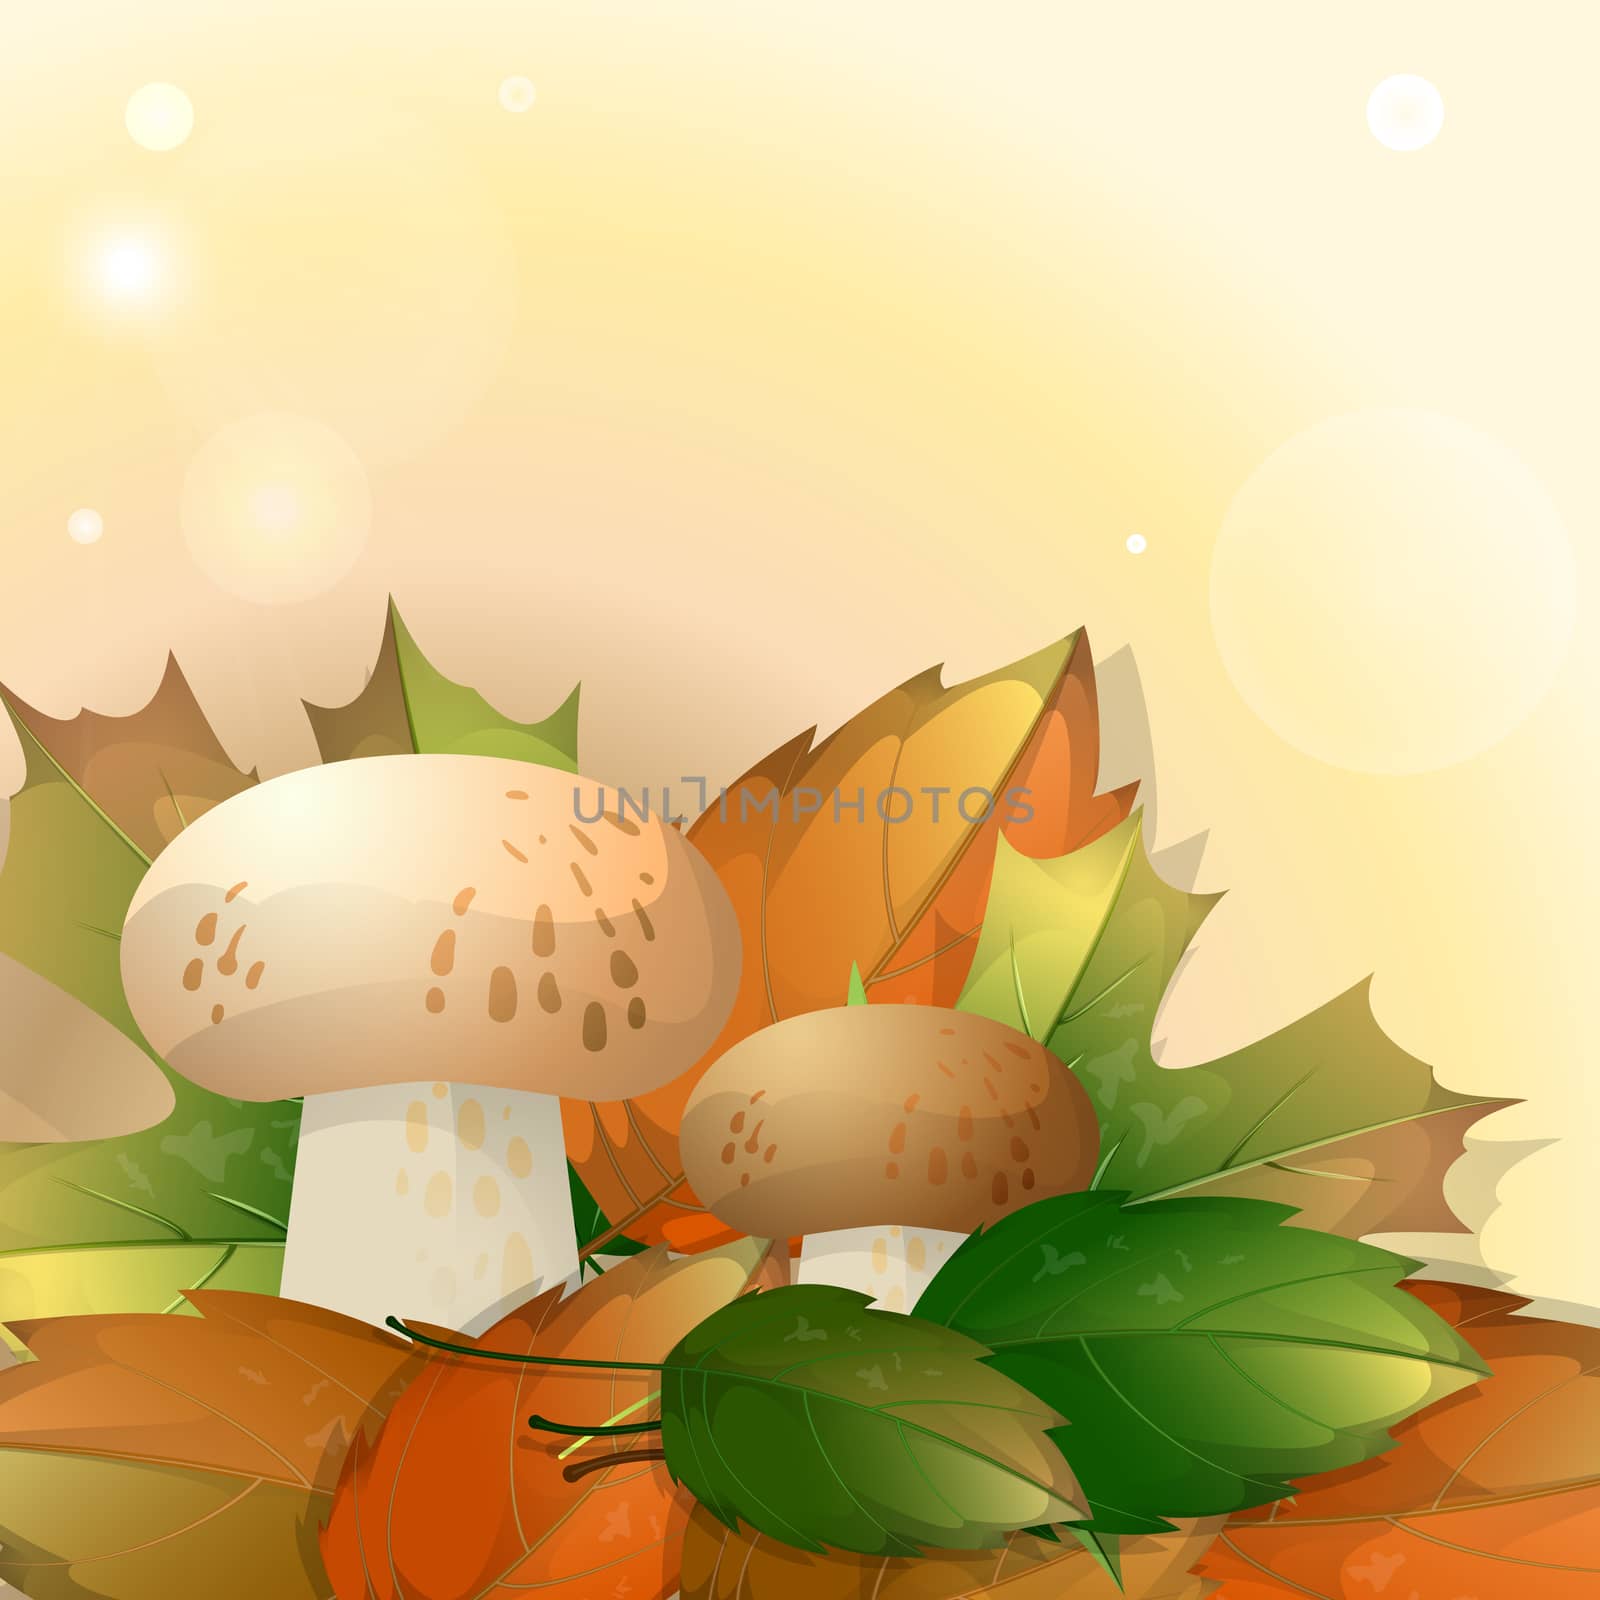 Mushrooms and autumn leaves on a light background with place for your text. by Adamchuk